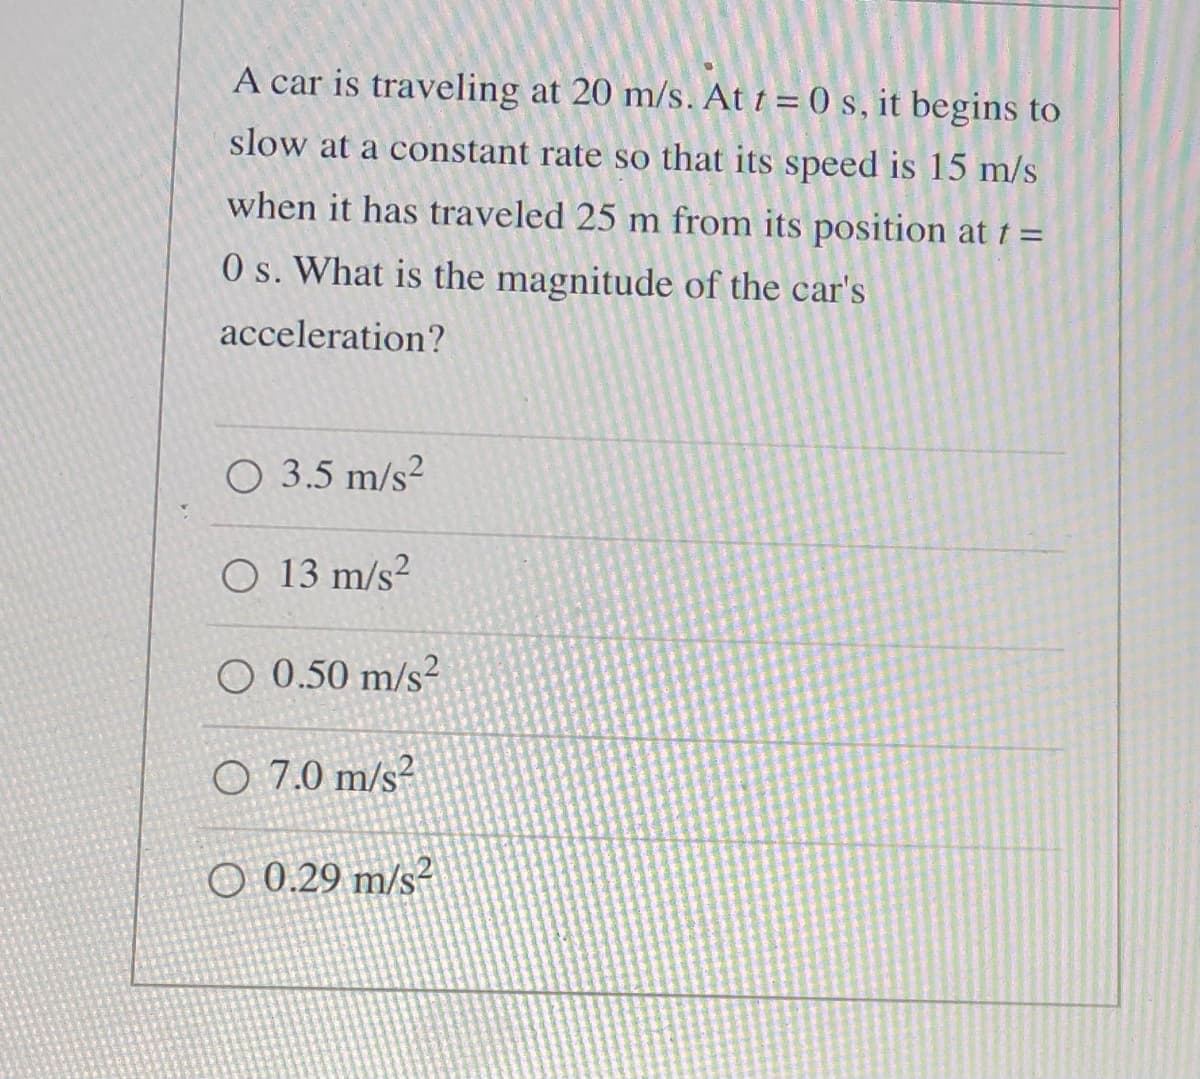 A car is traveling at 20 m/s. At t = (0 s, it begins to
slow at a constant rate so that its speed is 15 m/s
when it has traveled 25 m from its position at t =
O s. What is the magnitude of the car's
acceleration?
O 3.5 m/s?
O 13 m/s²
O 0.50 m/s²
O 7.0 m/s²
O 0.29 m/s²
